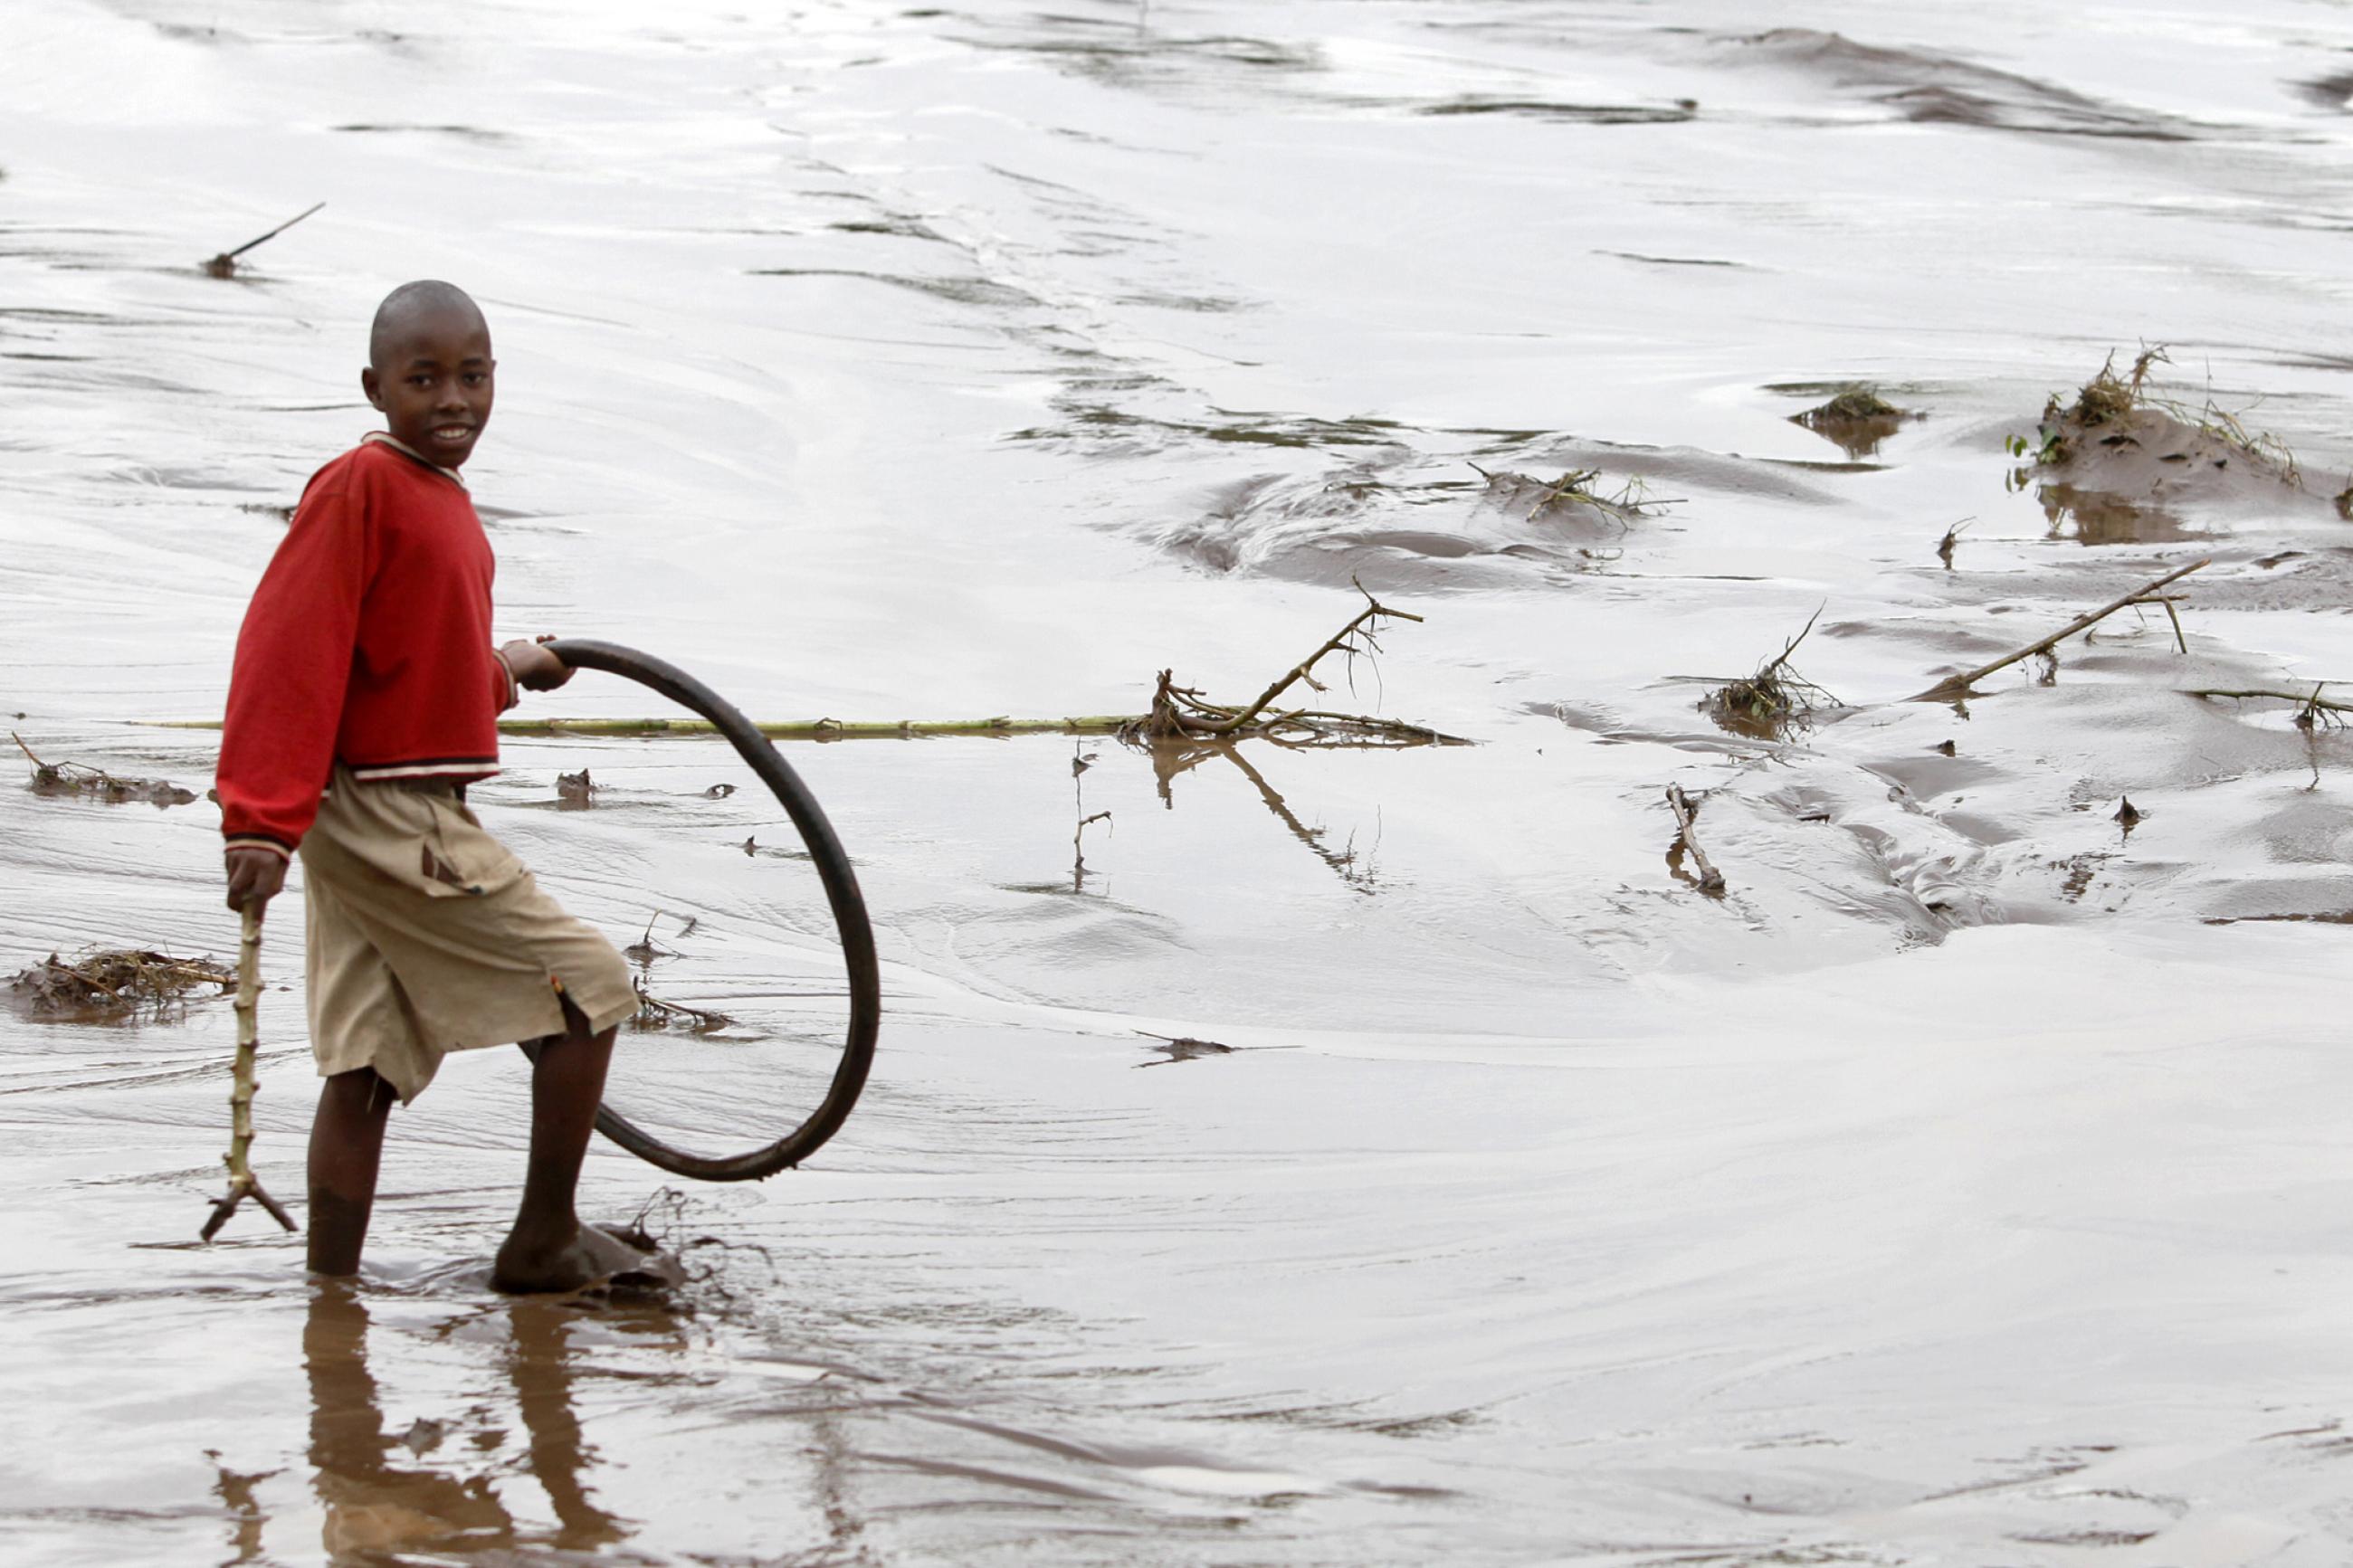 A boy wades through floodwaters after heavy rains in Bududa village.